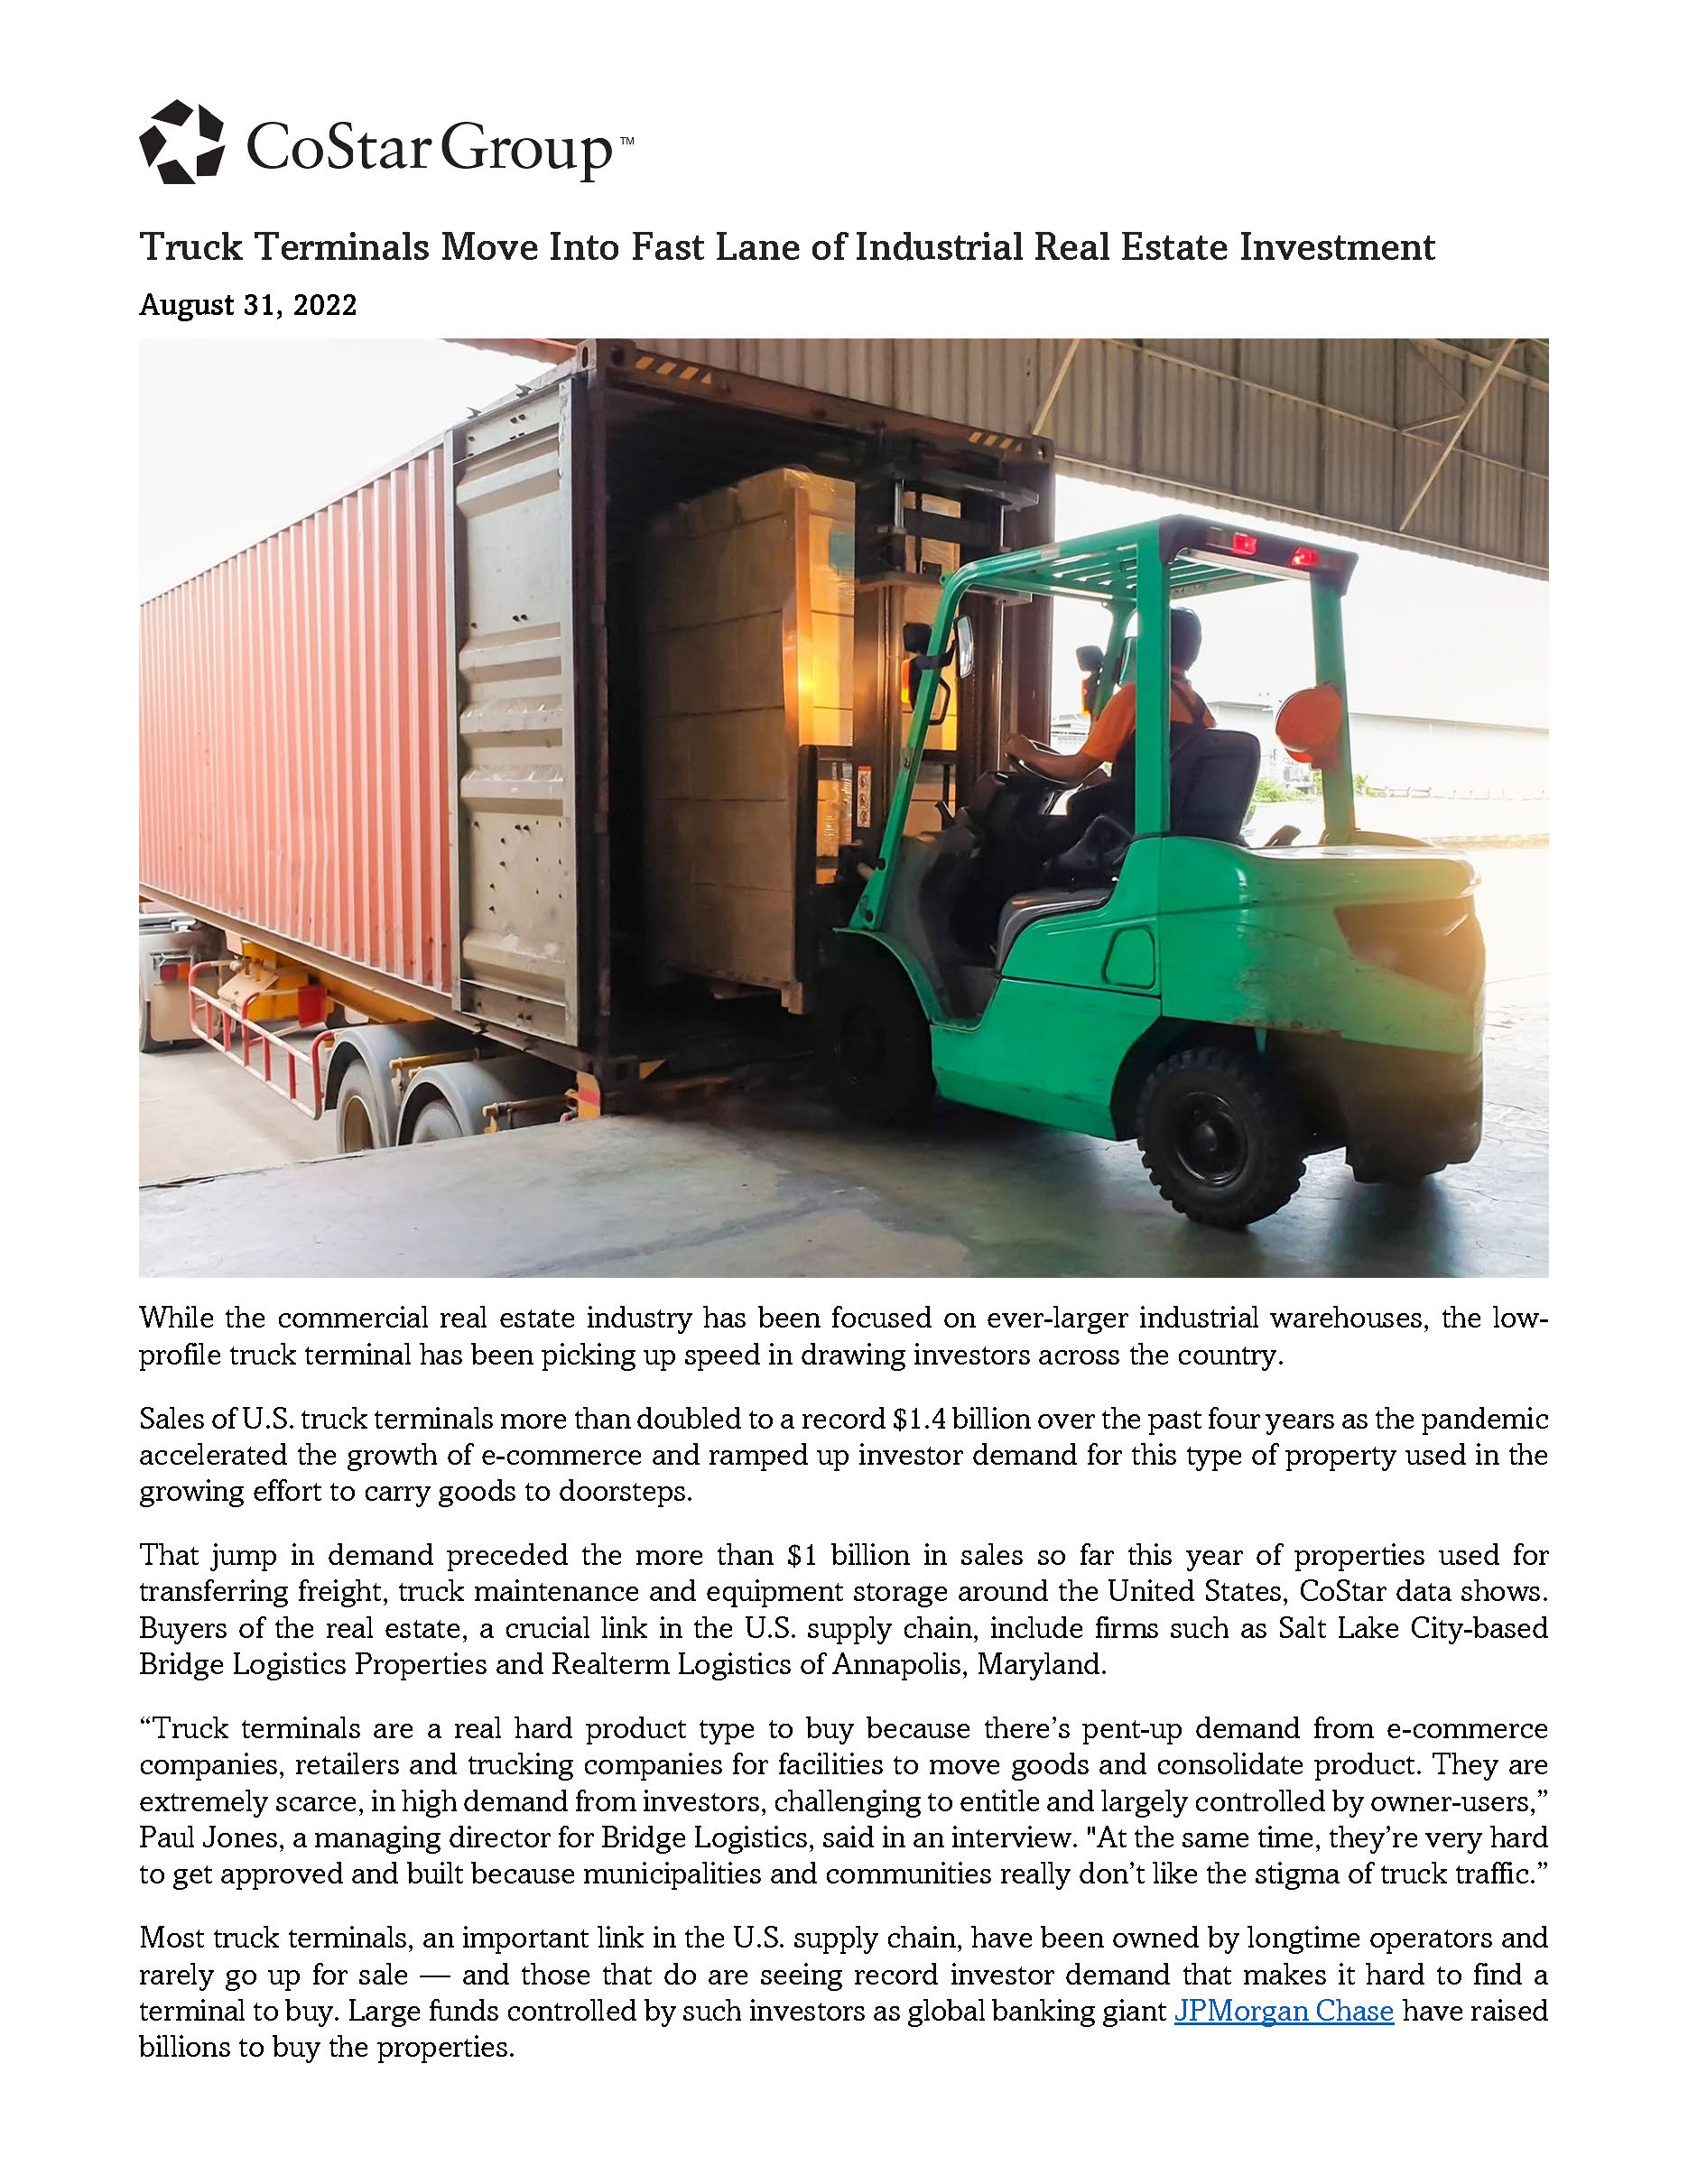 Truck Terminals Move Into Fast Lane of Industrial Real Estate Investment 8.31.2022_Page_1